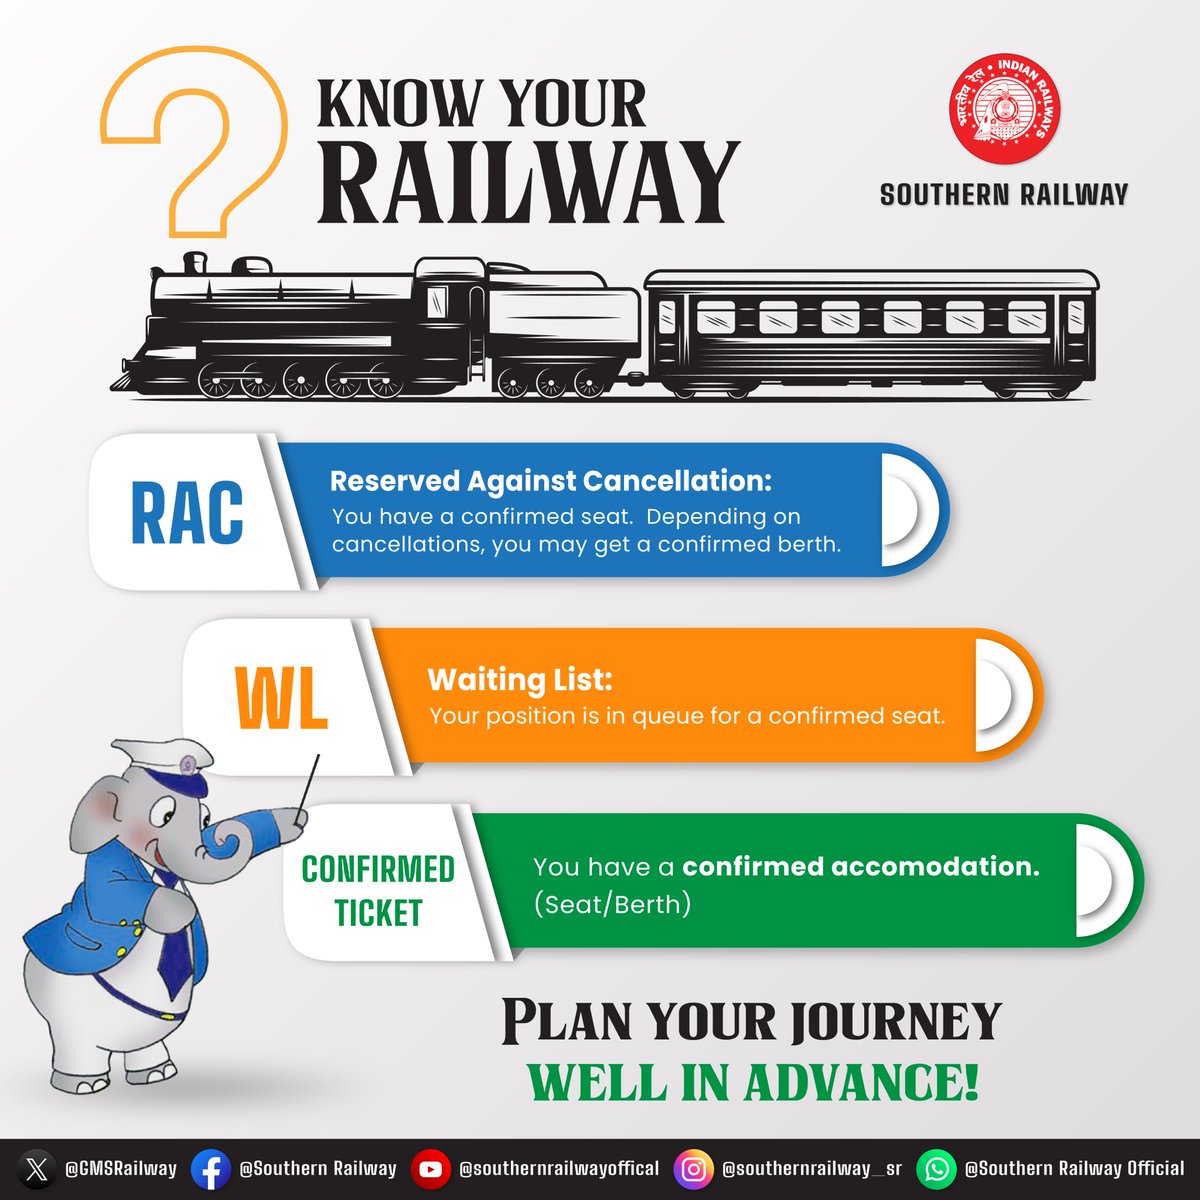 It's time to learn some Railway Terms!

Understanding the meaning of these terms help you enjoy a hassle-free journey. Let's travel with ease with updated Knowledge about Railways.

#KnowYourRailway #PlanYourJourney #Traintravel

@GMSRailway @RailMinIndia